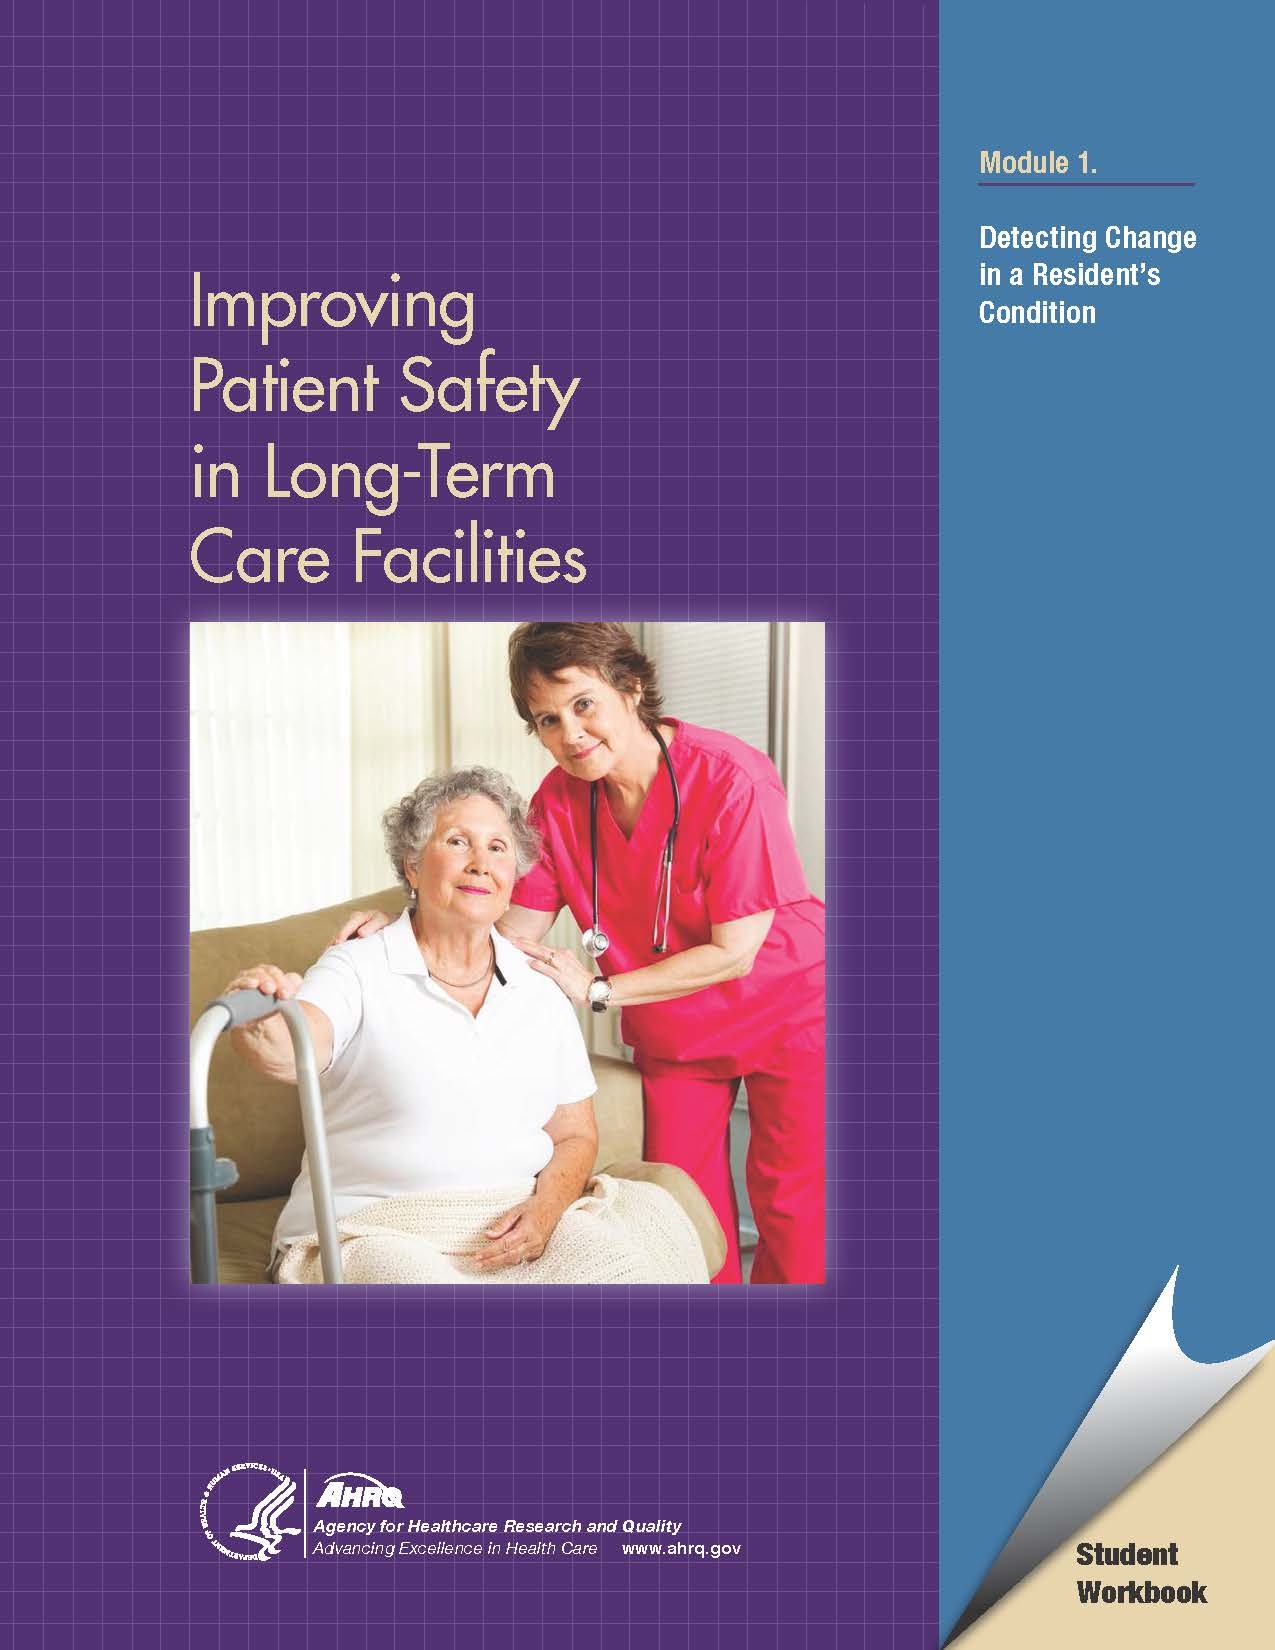 AHRQ_Image_hyperlink toImproving Patient Safety in Long-Term Care Facilities: Detecting Change in a Resident's Condition